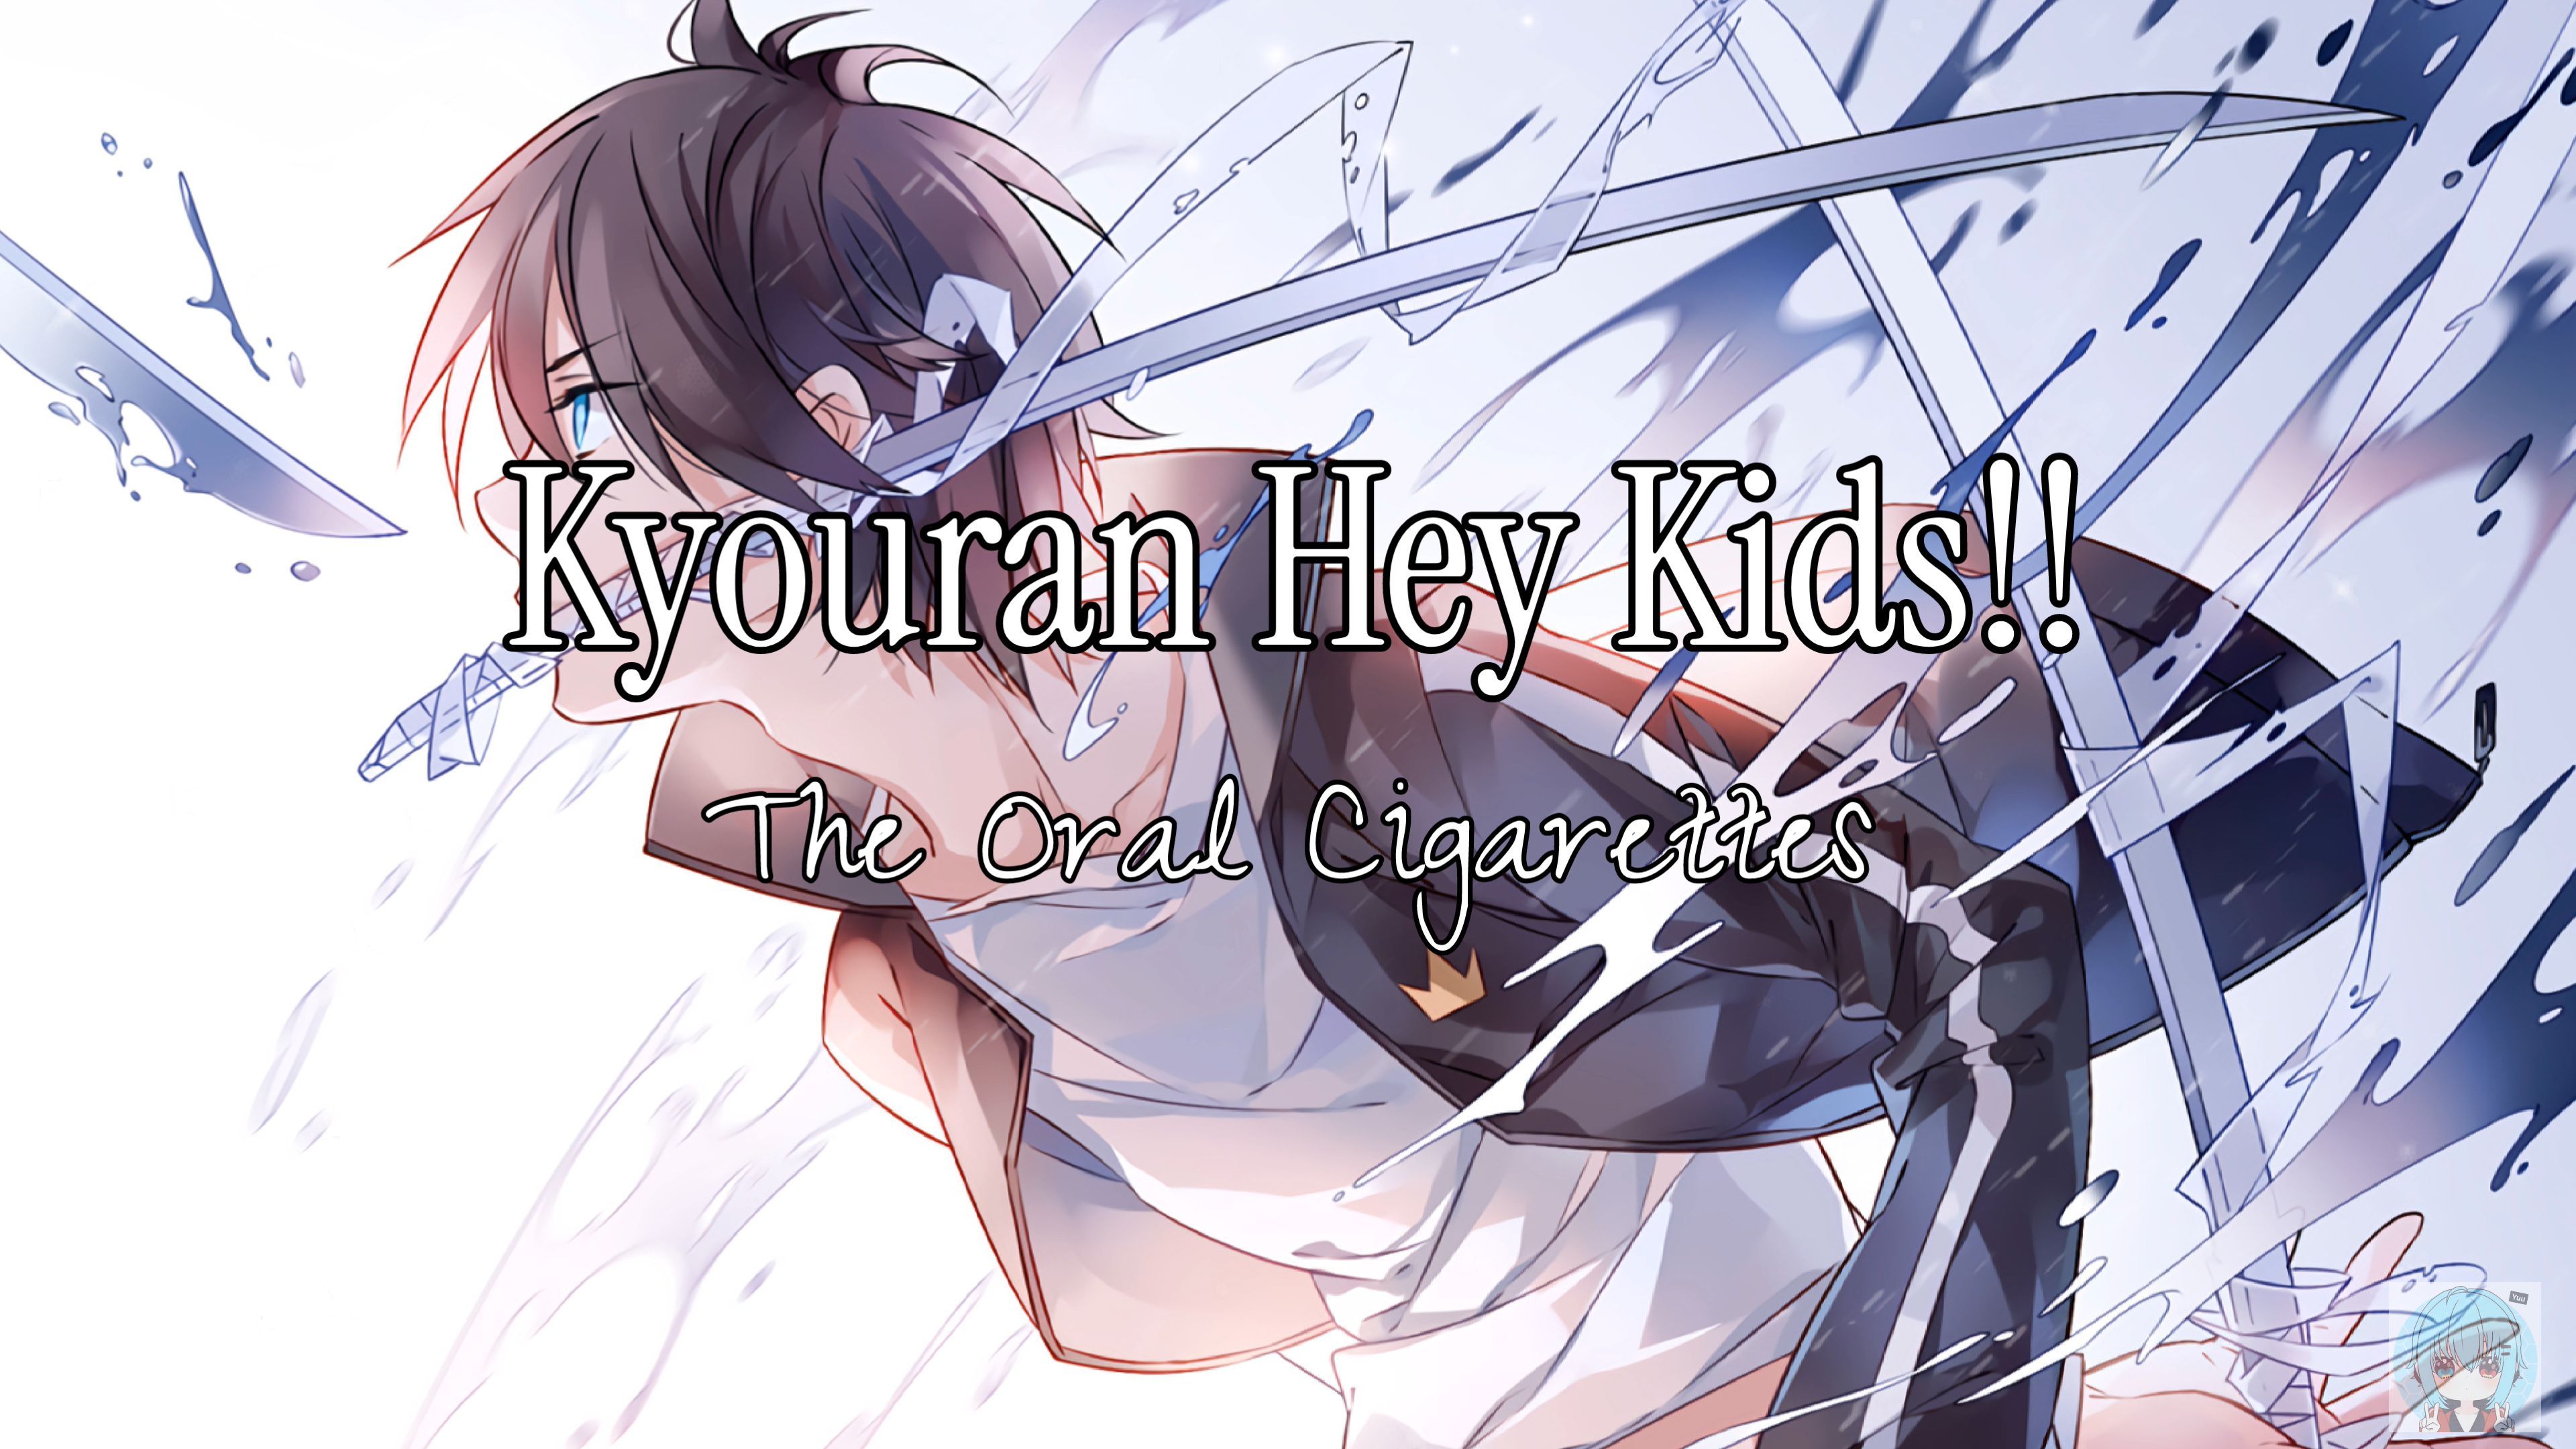 Kyouran Hey KidsThe Oral Cigarettes  Song Lyrics and Music by  TeamHiddenVOICE arranged by Loropechka on Smule Social Singing app